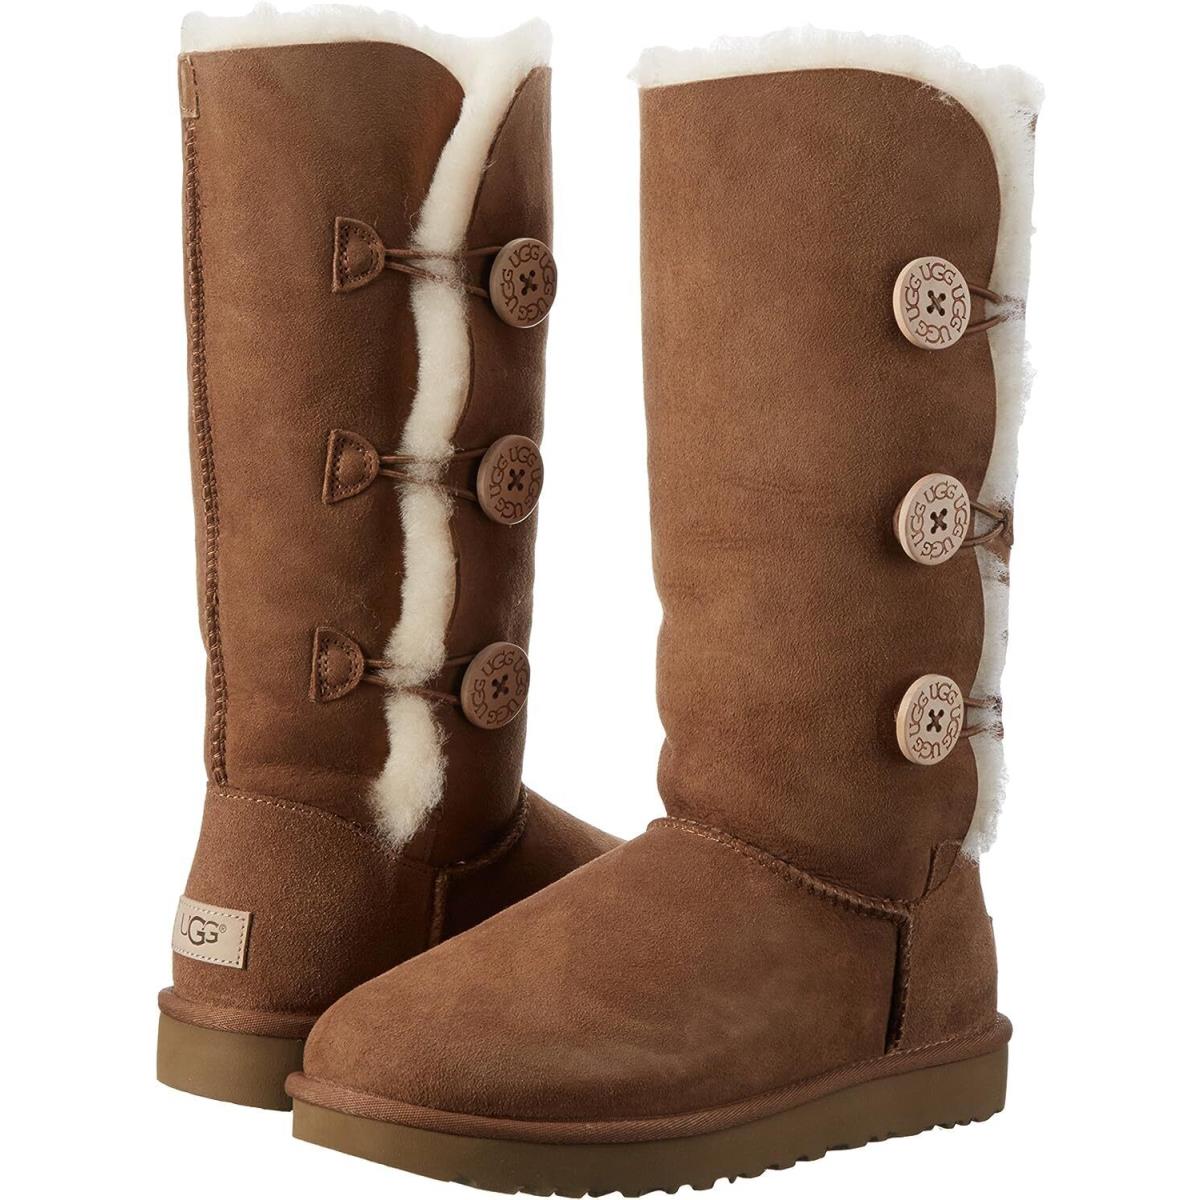 Women`s Shoes Ugg Bailey Button Triplet Suede Sheepskin Boots 1016227 Chestnut - Brown